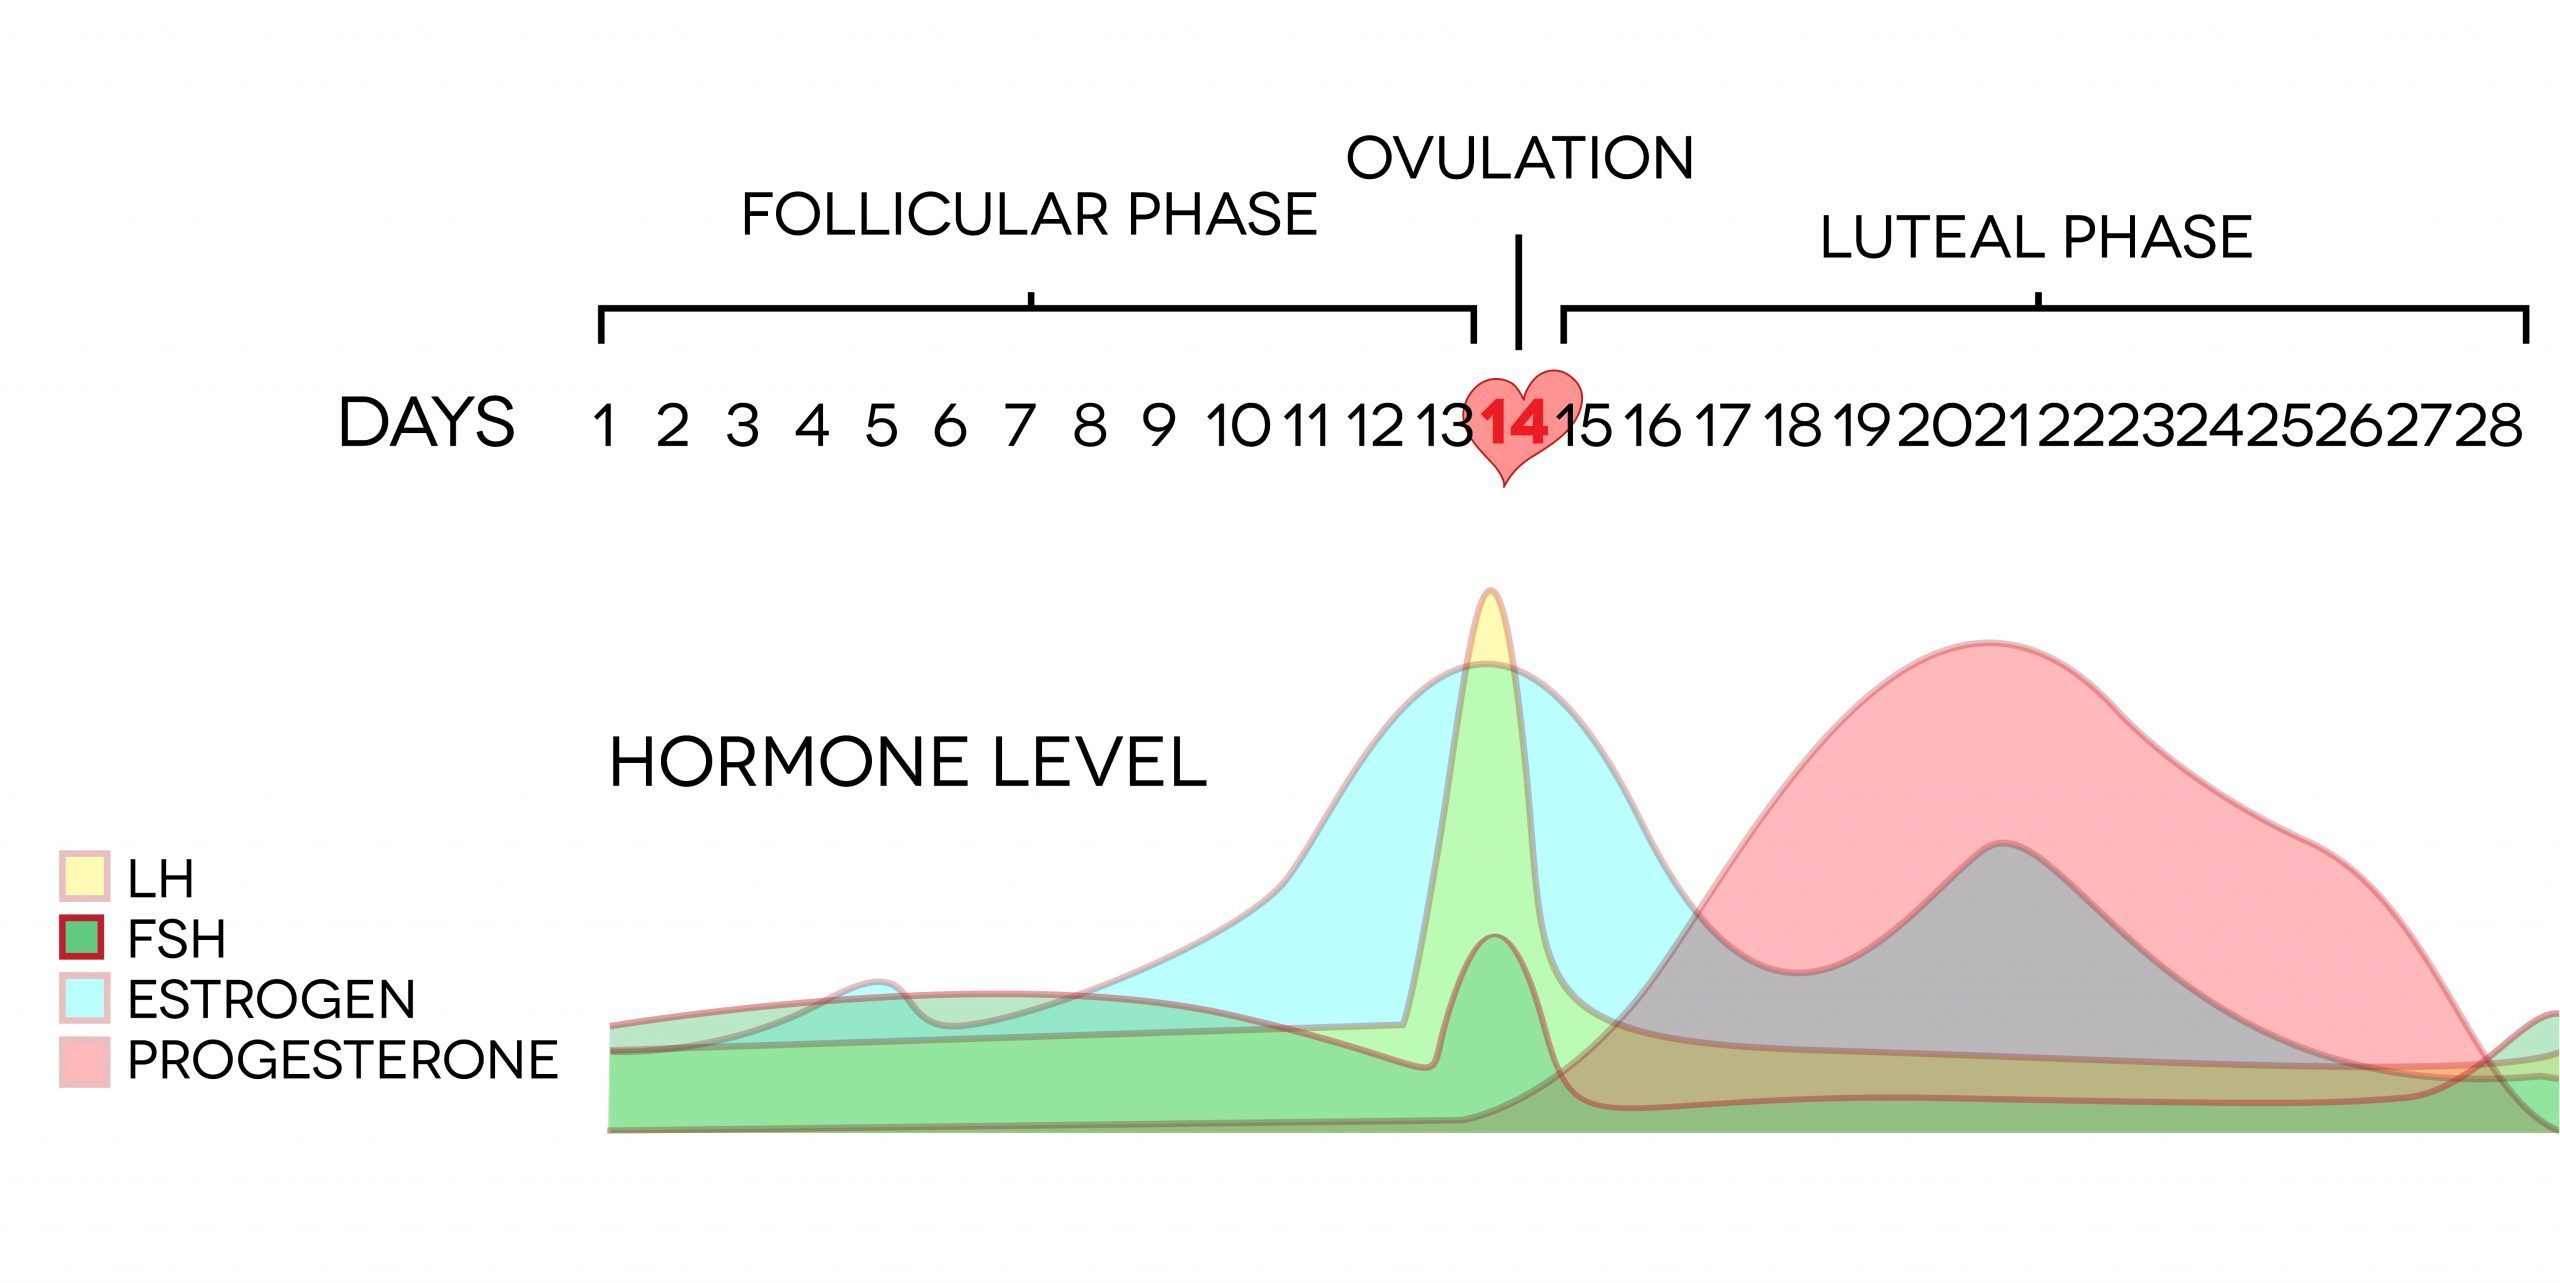 Short luteal phase after chemical - Trying to Conceive